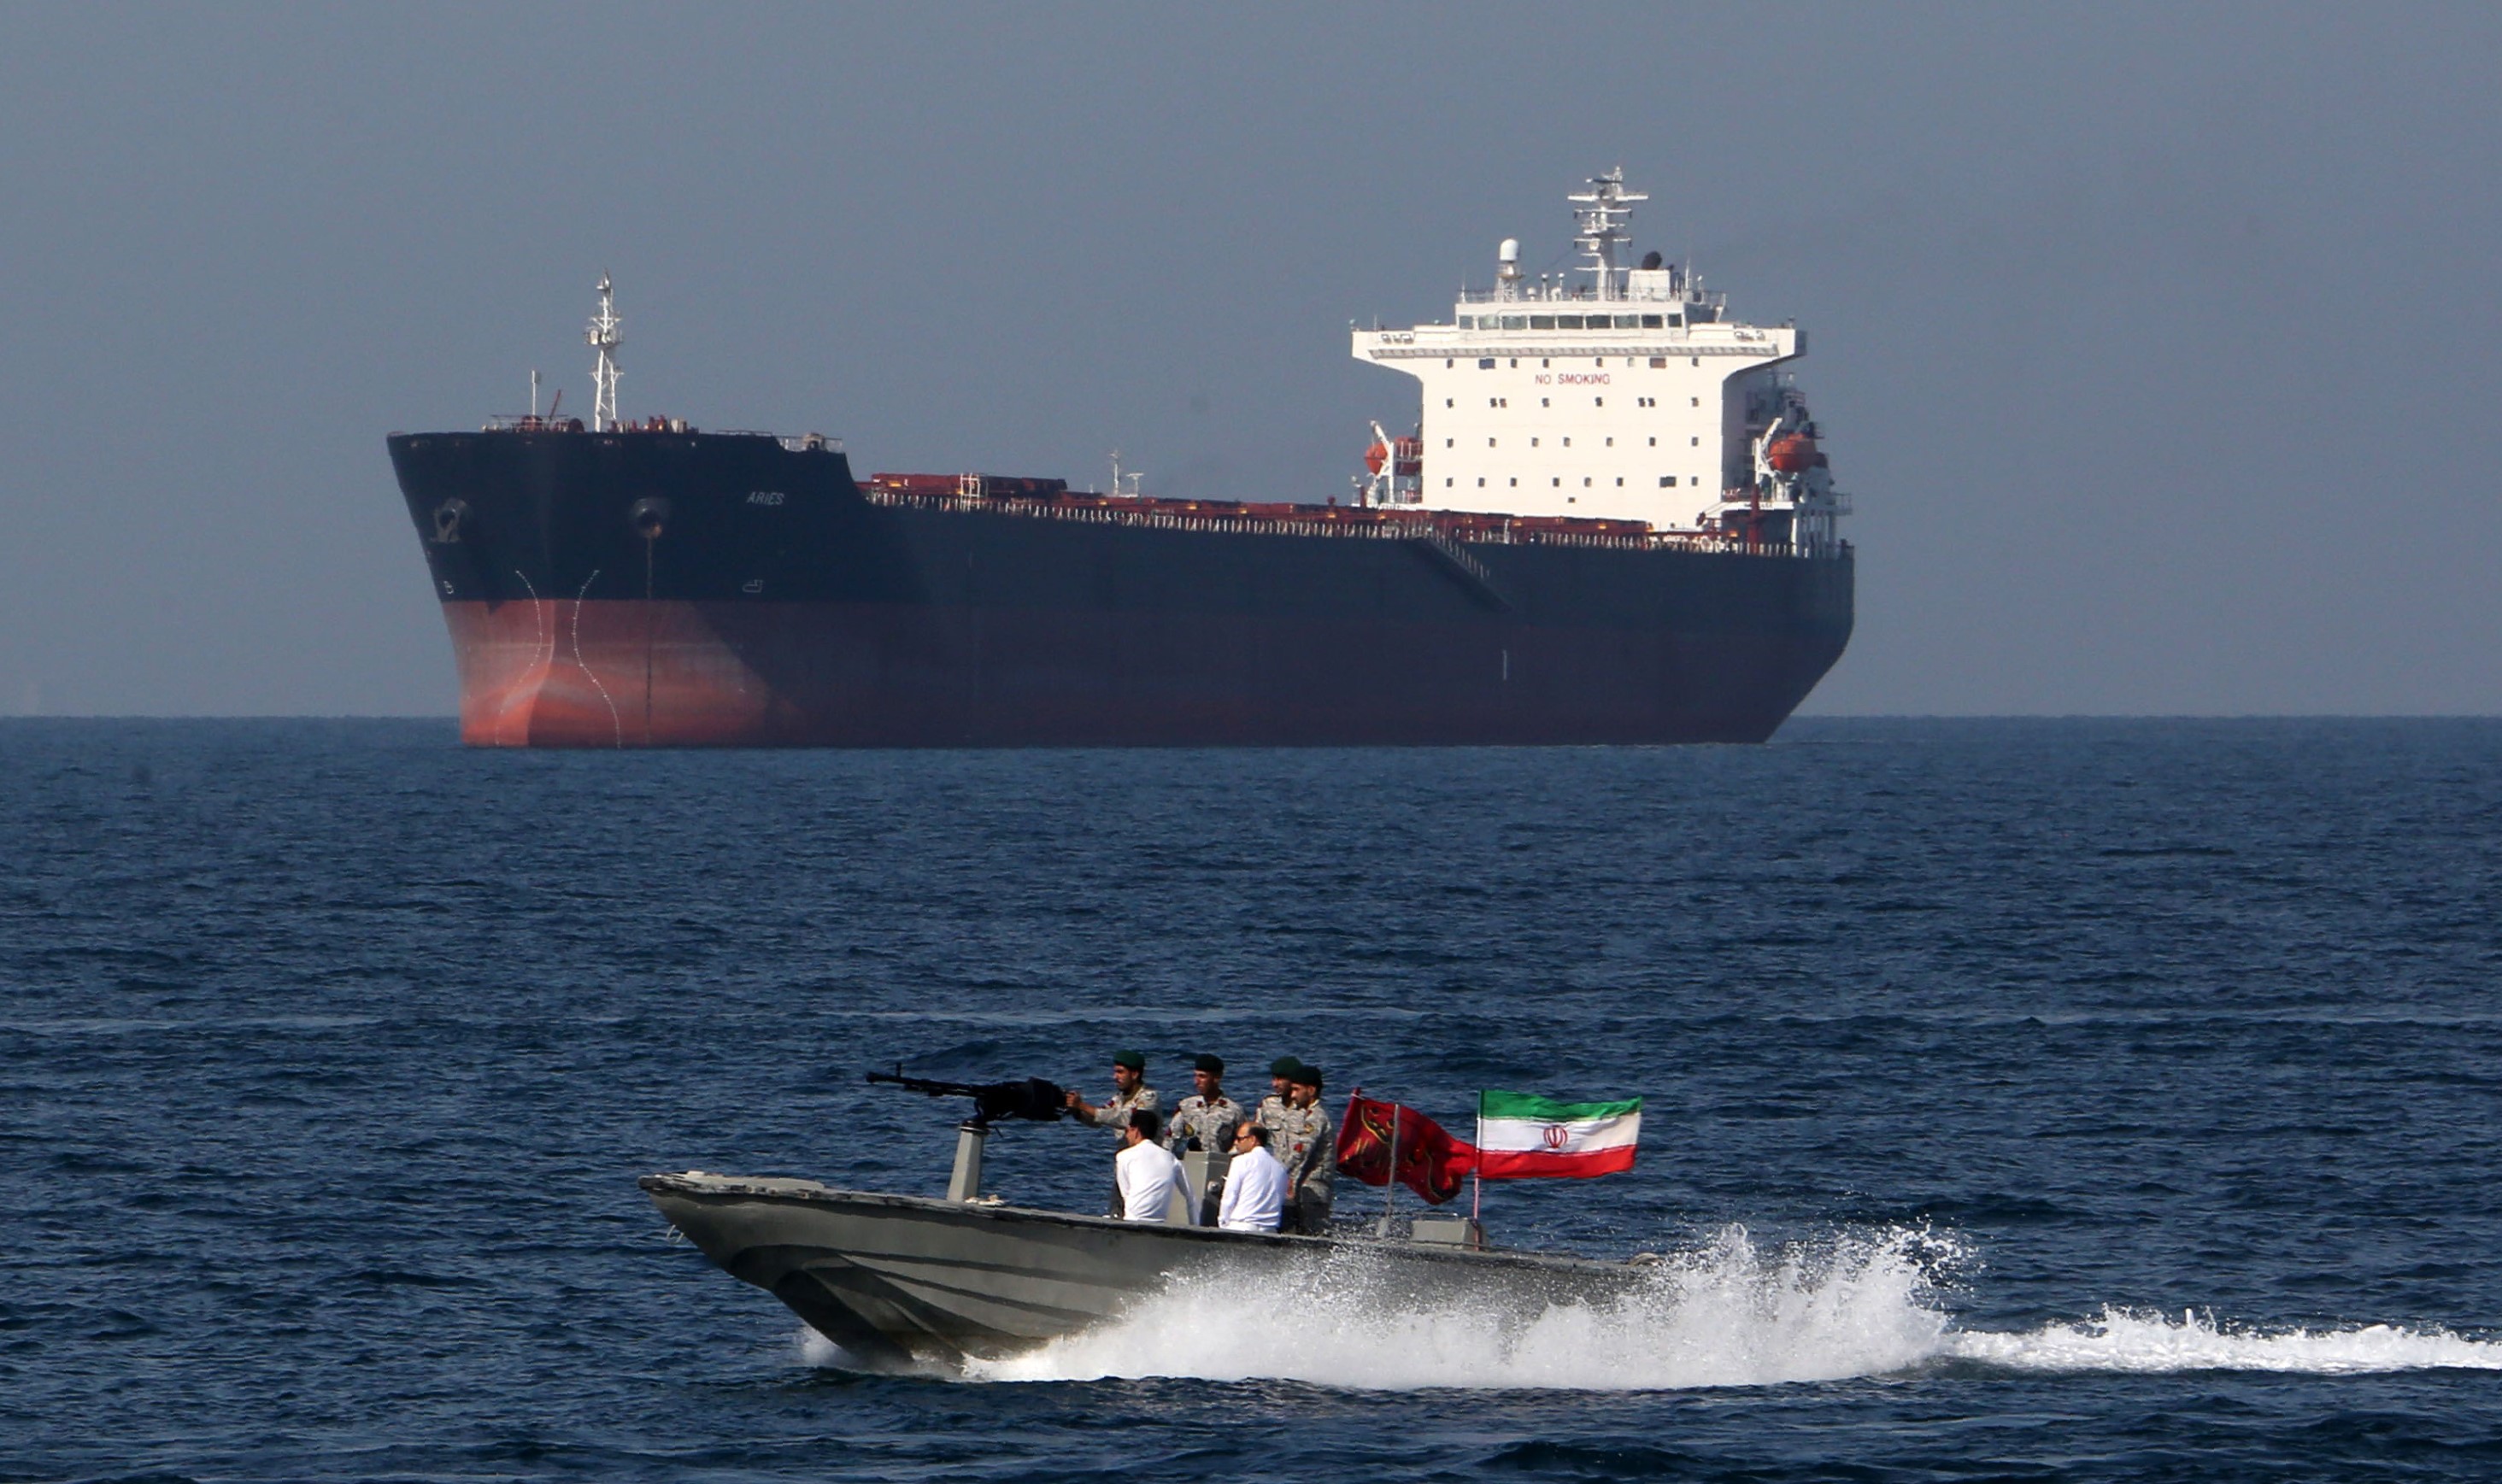 Iranian soldiers take part in the "National Persian Gulf day" in the Strait of Hormuz, on 30 April (AFP)